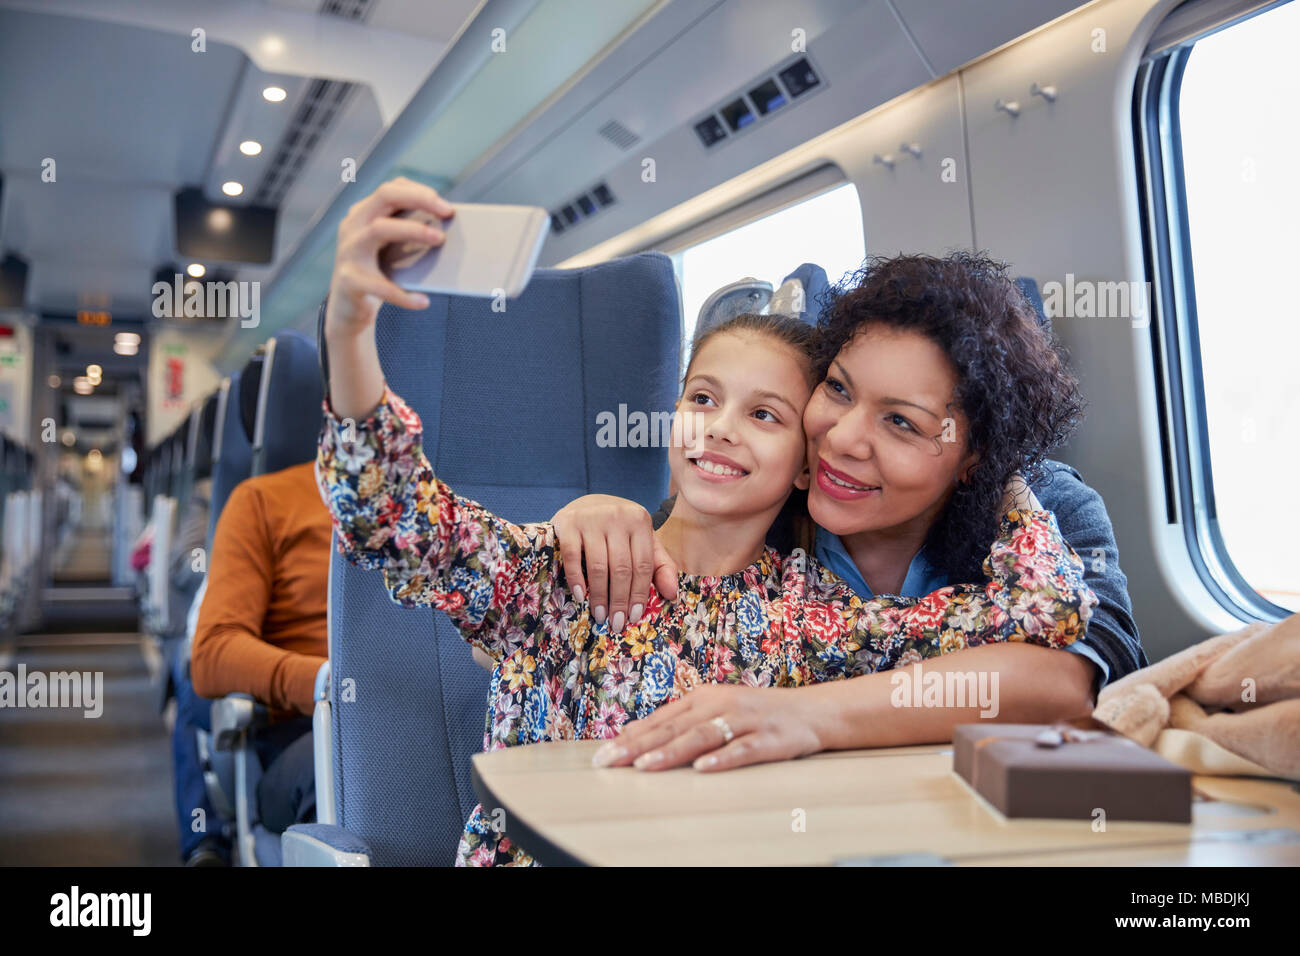 Affectionate mother and daughter taking selfie with camera phone on passenger train Stock Photo